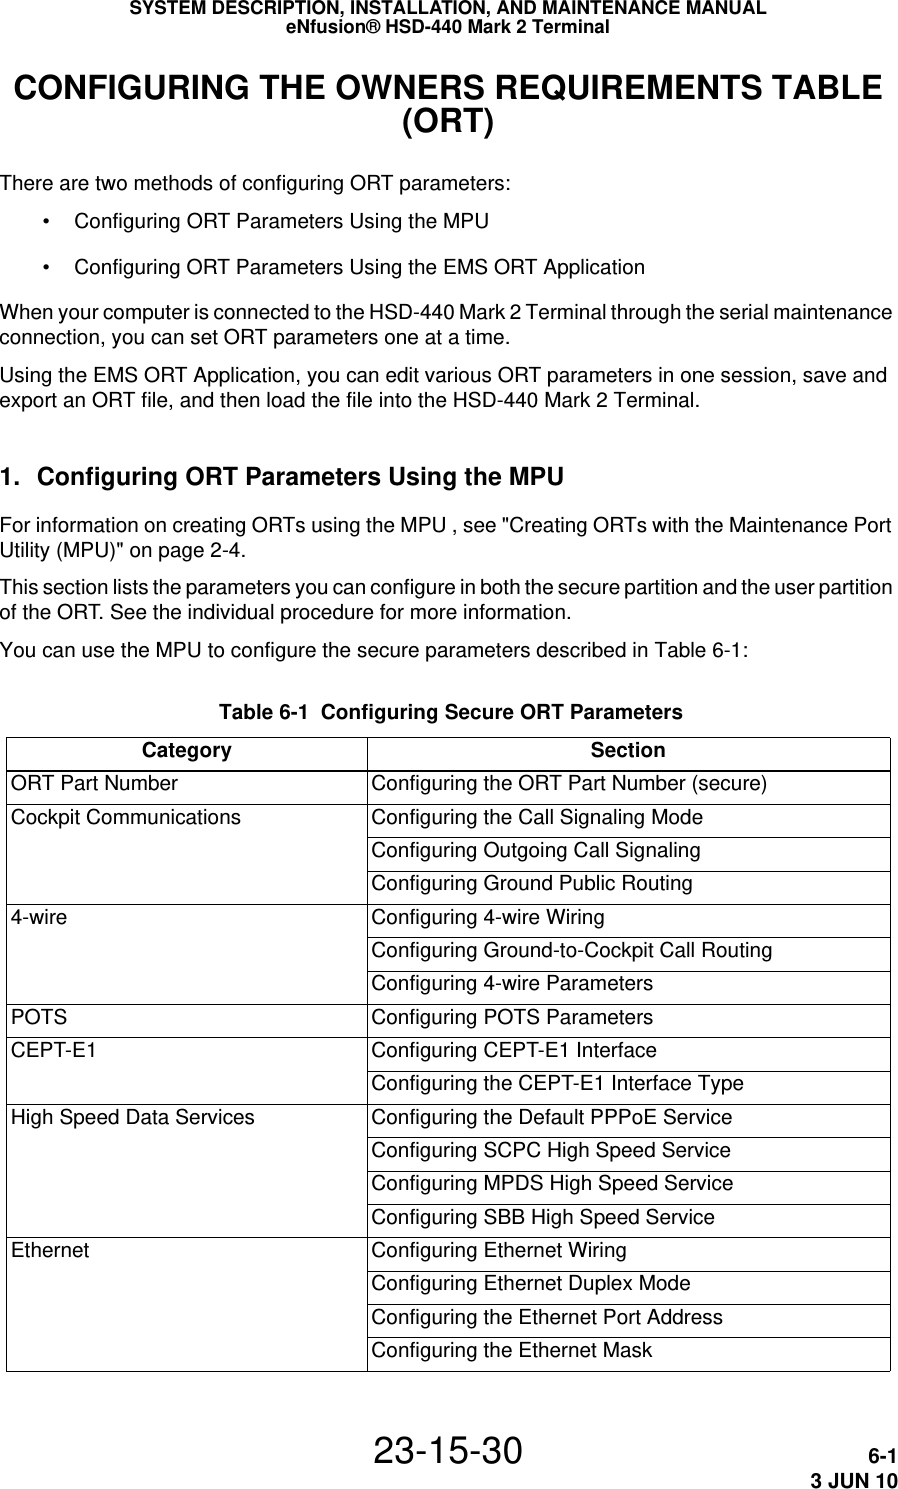 SYSTEM DESCRIPTION, INSTALLATION, AND MAINTENANCE MANUALeNfusion® HSD-440 Mark 2 Terminal23-15-30 6-13 JUN 10CONFIGURING THE OWNERS REQUIREMENTS TABLE (ORT)There are two methods of configuring ORT parameters: • Configuring ORT Parameters Using the MPU • Configuring ORT Parameters Using the EMS ORT ApplicationWhen your computer is connected to the HSD-440 Mark 2 Terminal through the serial maintenance connection, you can set ORT parameters one at a time.Using the EMS ORT Application, you can edit various ORT parameters in one session, save and export an ORT file, and then load the file into the HSD-440 Mark 2 Terminal.1. Configuring ORT Parameters Using the MPUFor information on creating ORTs using the MPU , see &quot;Creating ORTs with the Maintenance Port Utility (MPU)&quot; on page 2-4.This section lists the parameters you can configure in both the secure partition and the user partition of the ORT. See the individual procedure for more information.You can use the MPU to configure the secure parameters described in Table 6-1:  Table 6-1  Configuring Secure ORT Parameters Category SectionORT Part Number Configuring the ORT Part Number (secure)Cockpit Communications Configuring the Call Signaling ModeConfiguring Outgoing Call SignalingConfiguring Ground Public Routing4-wire Configuring 4-wire WiringConfiguring Ground-to-Cockpit Call RoutingConfiguring 4-wire ParametersPOTS Configuring POTS ParametersCEPT-E1 Configuring CEPT-E1 InterfaceConfiguring the CEPT-E1 Interface TypeHigh Speed Data Services Configuring the Default PPPoE ServiceConfiguring SCPC High Speed ServiceConfiguring MPDS High Speed ServiceConfiguring SBB High Speed ServiceEthernet Configuring Ethernet WiringConfiguring Ethernet Duplex ModeConfiguring the Ethernet Port AddressConfiguring the Ethernet Mask